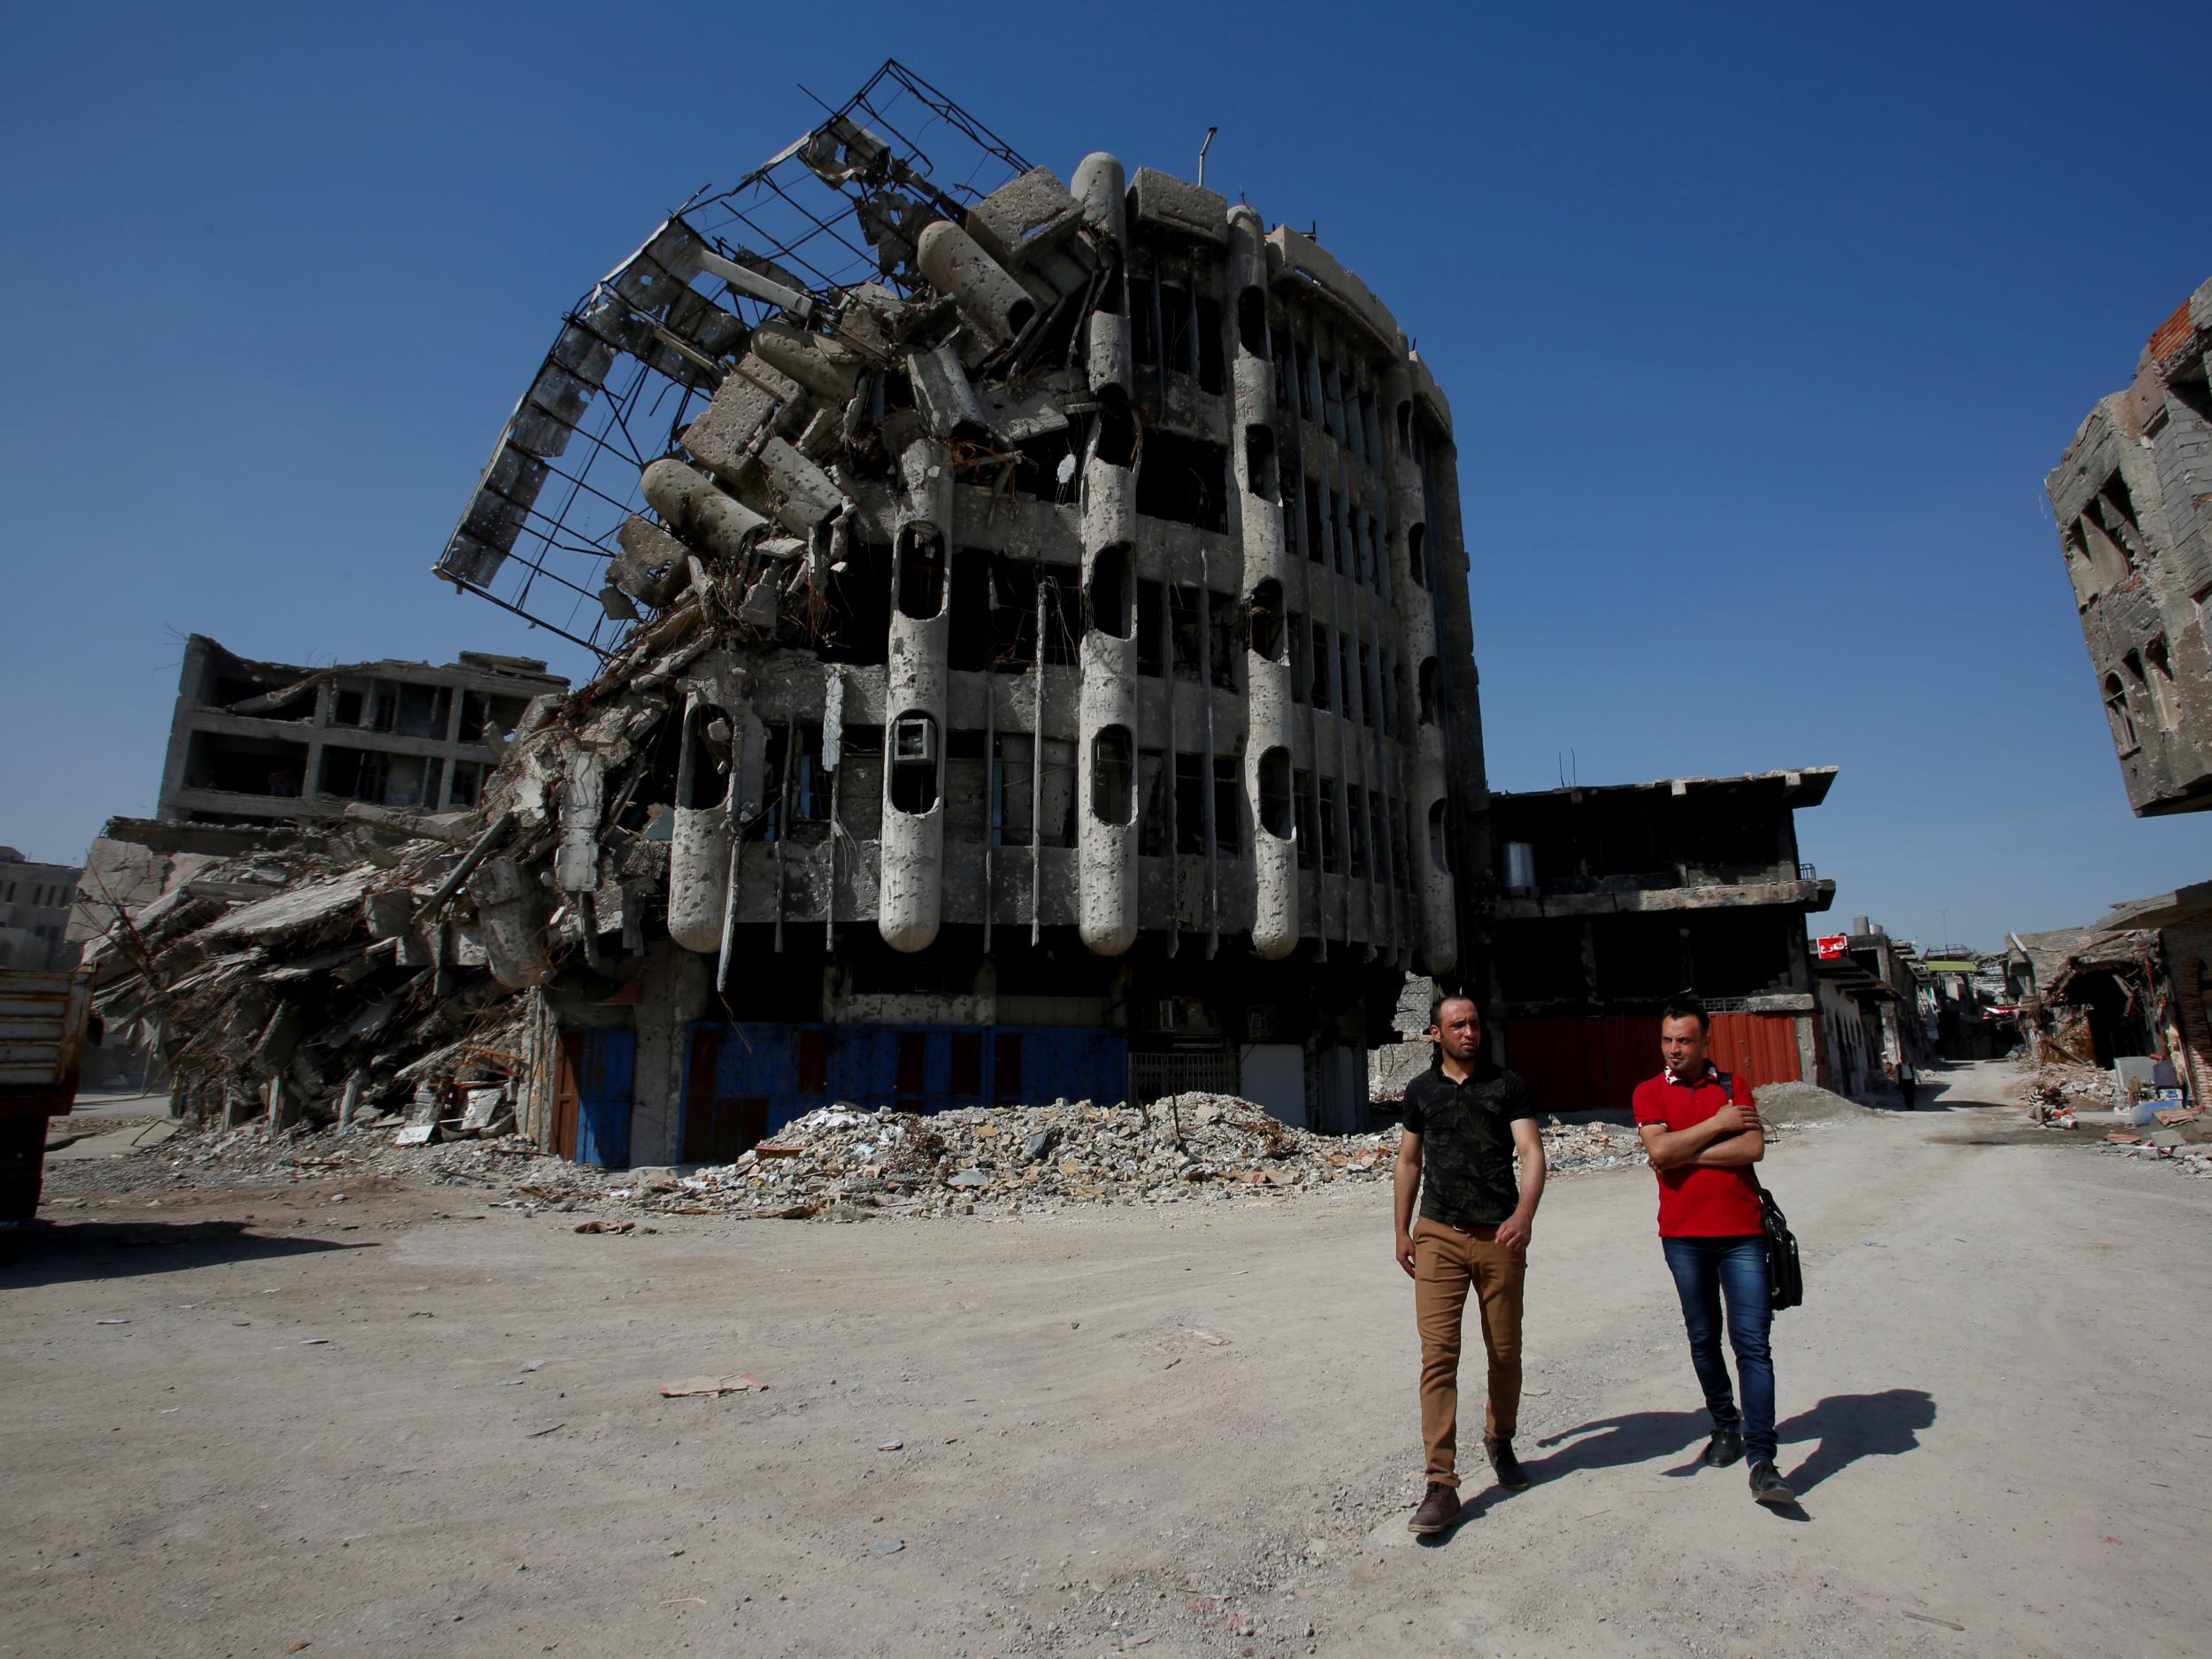 A damaged building in Mosul testifies to violence that continues to dog the country